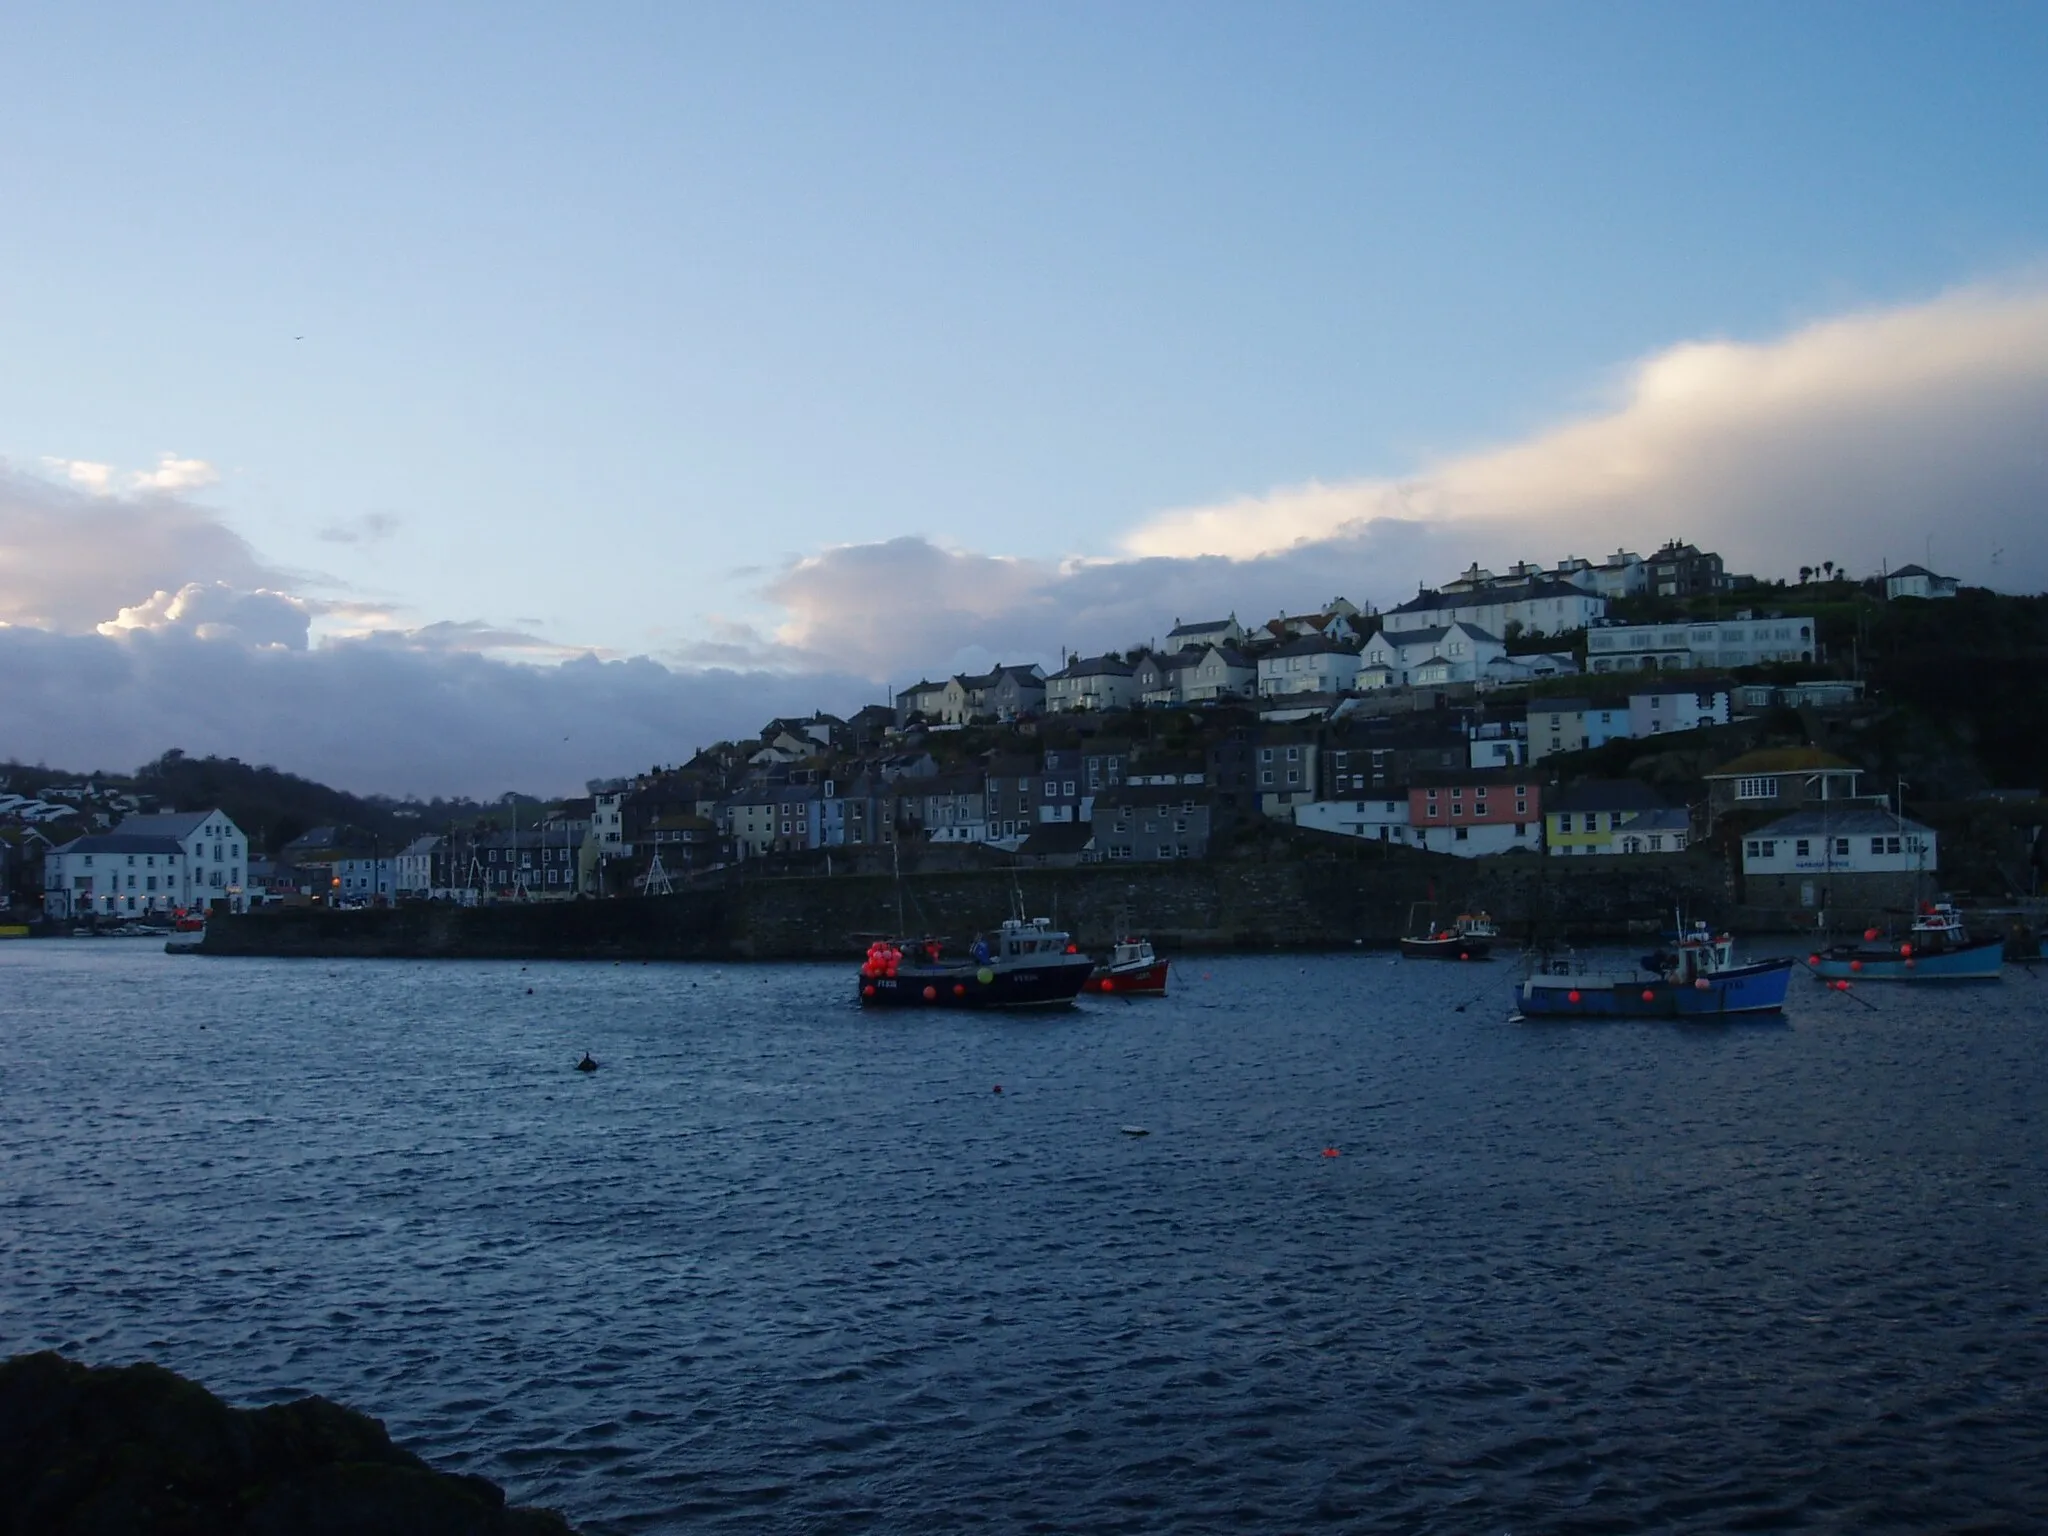 Image of Mevagissey